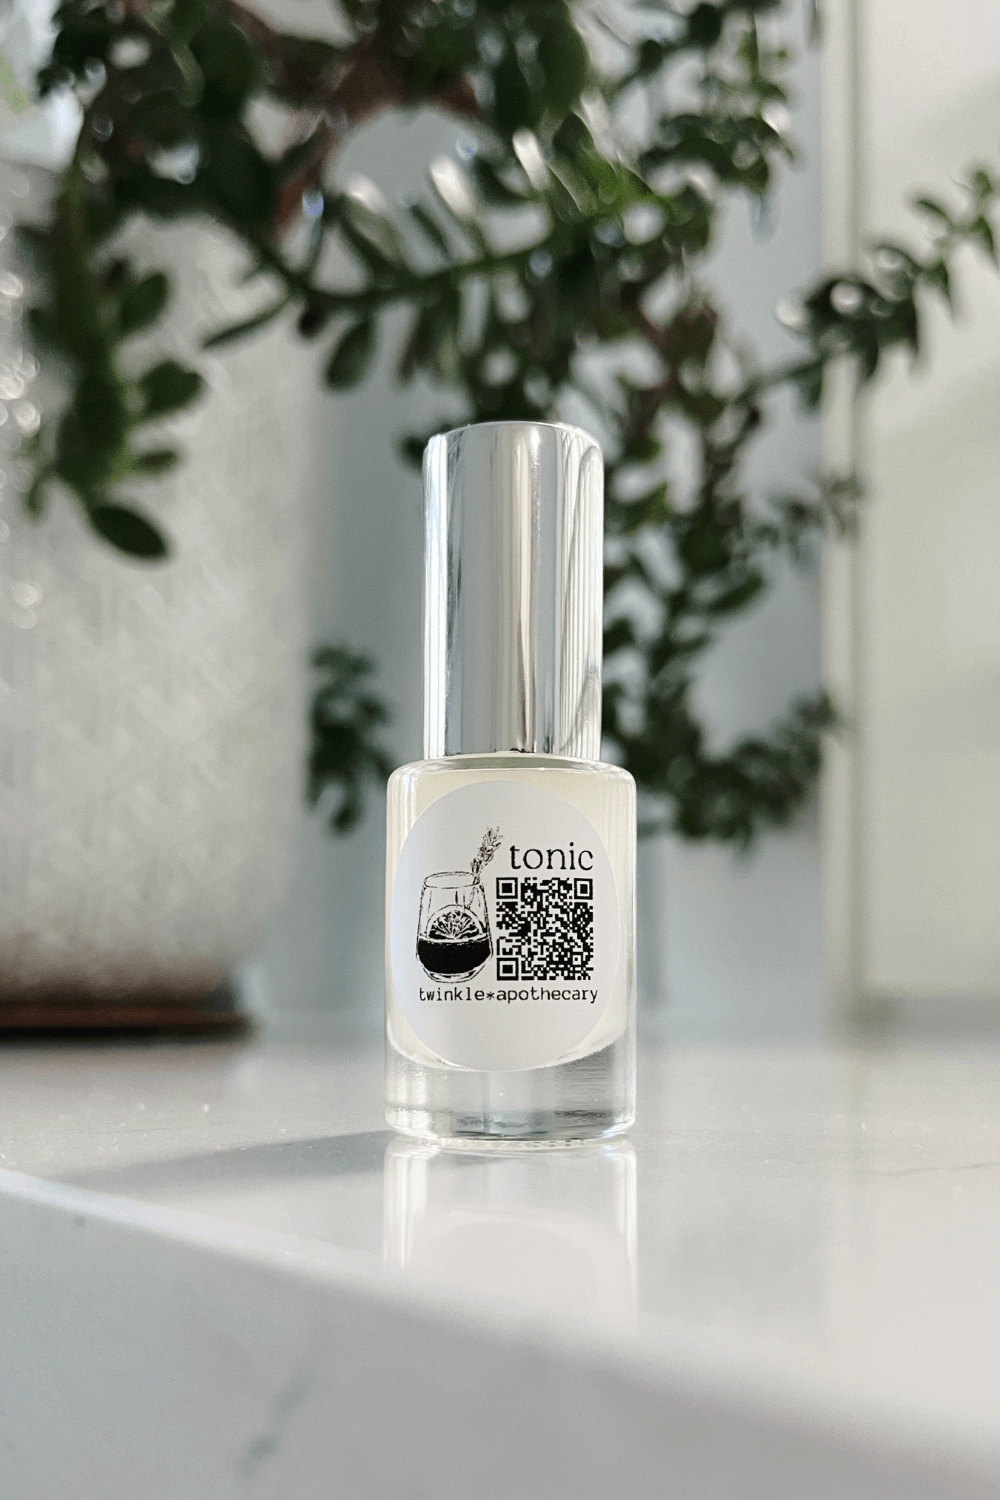 tonic organic perfume by twinkle apothecary 